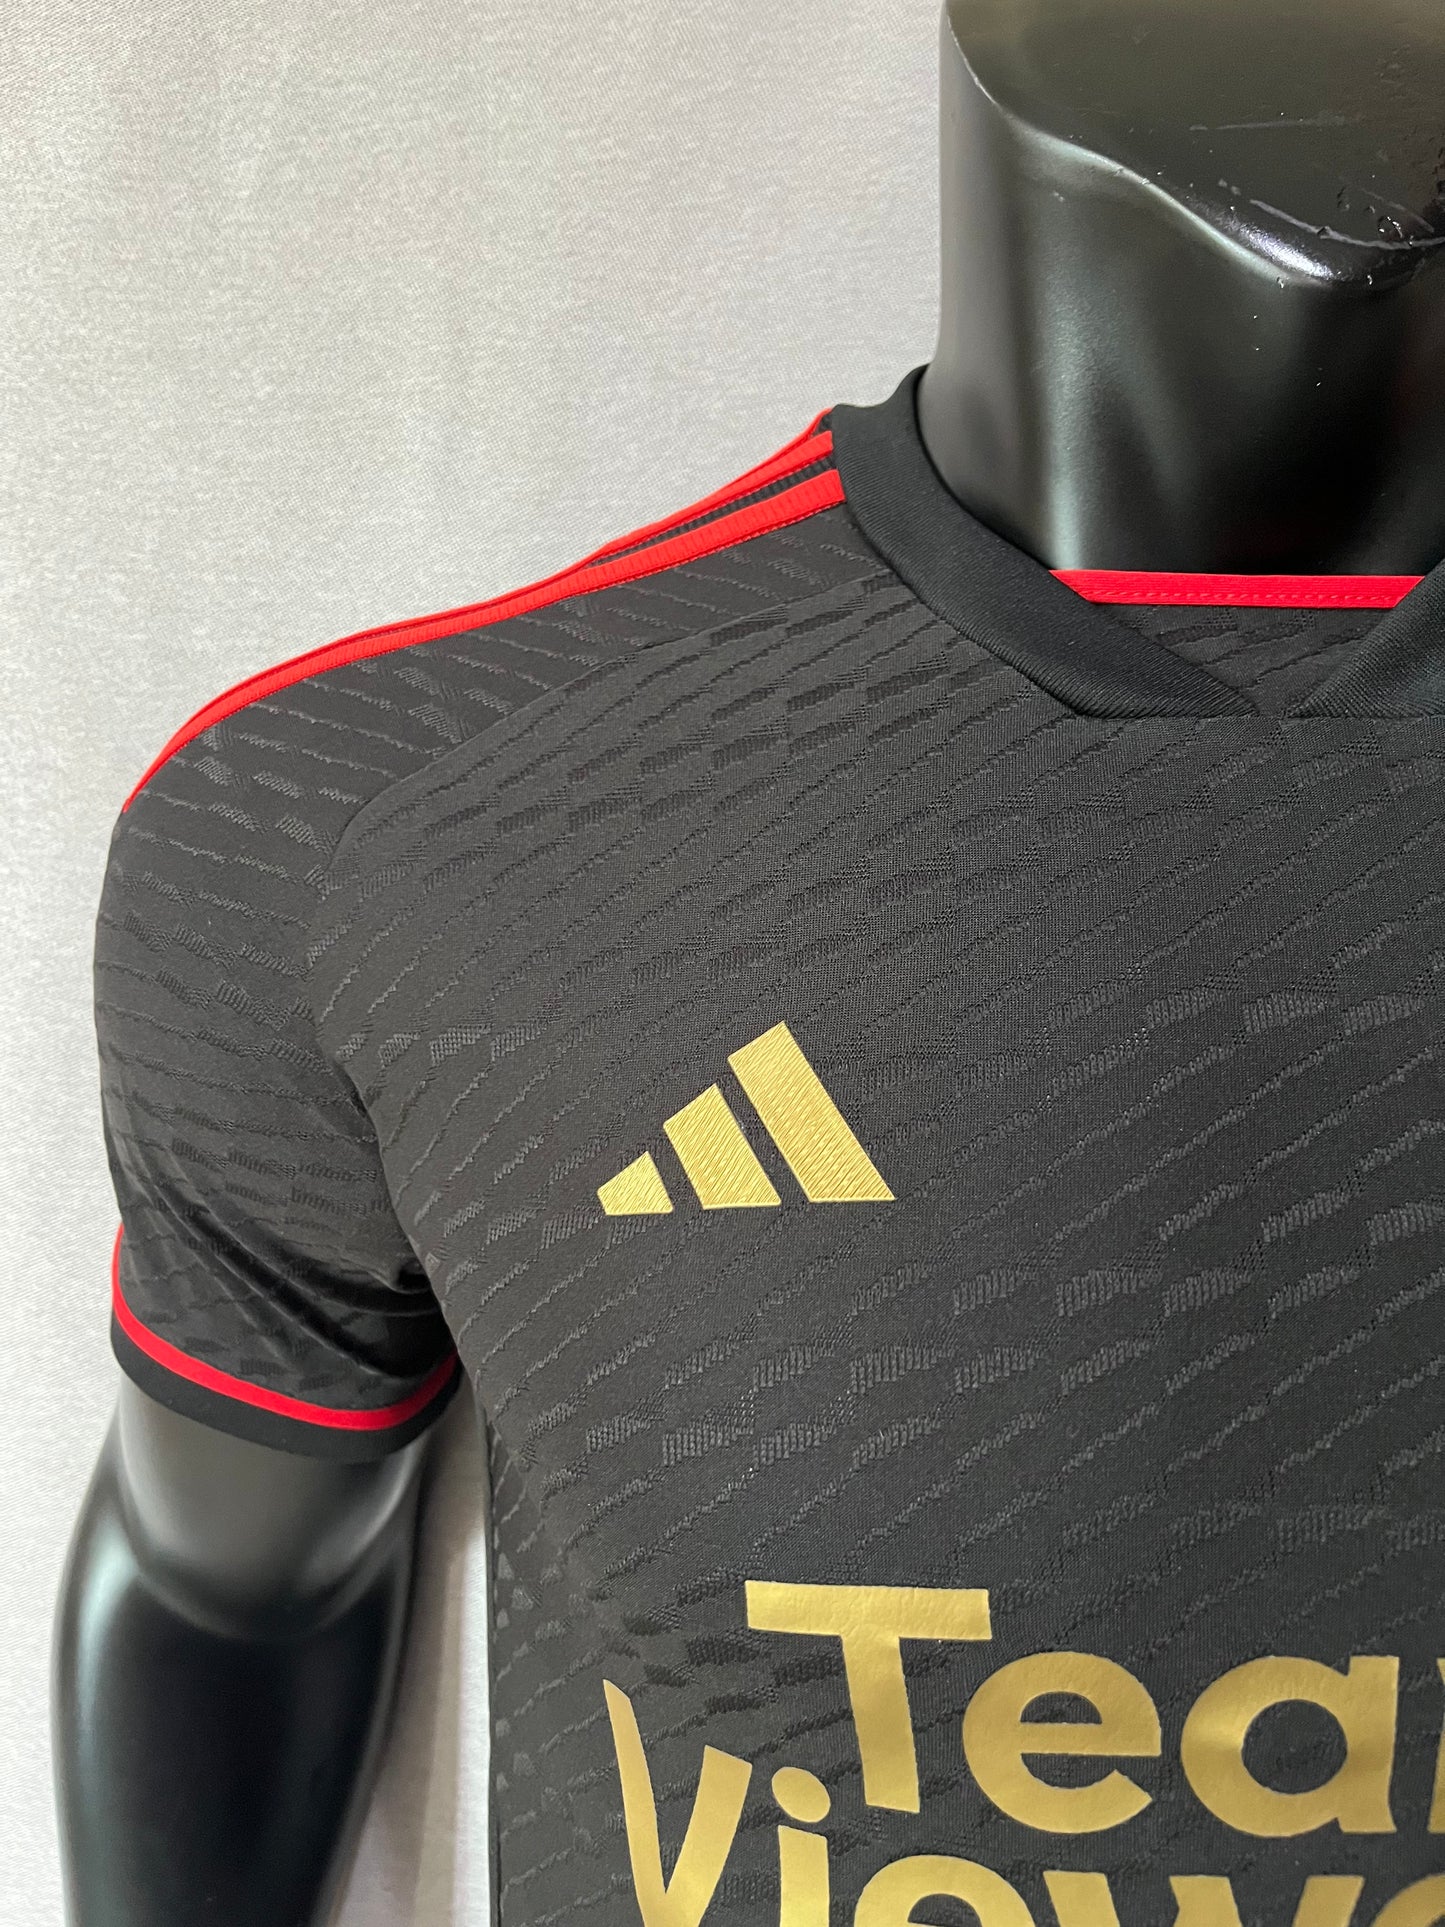 Manchester United 2023/2024 Special Black Kit - Player Version